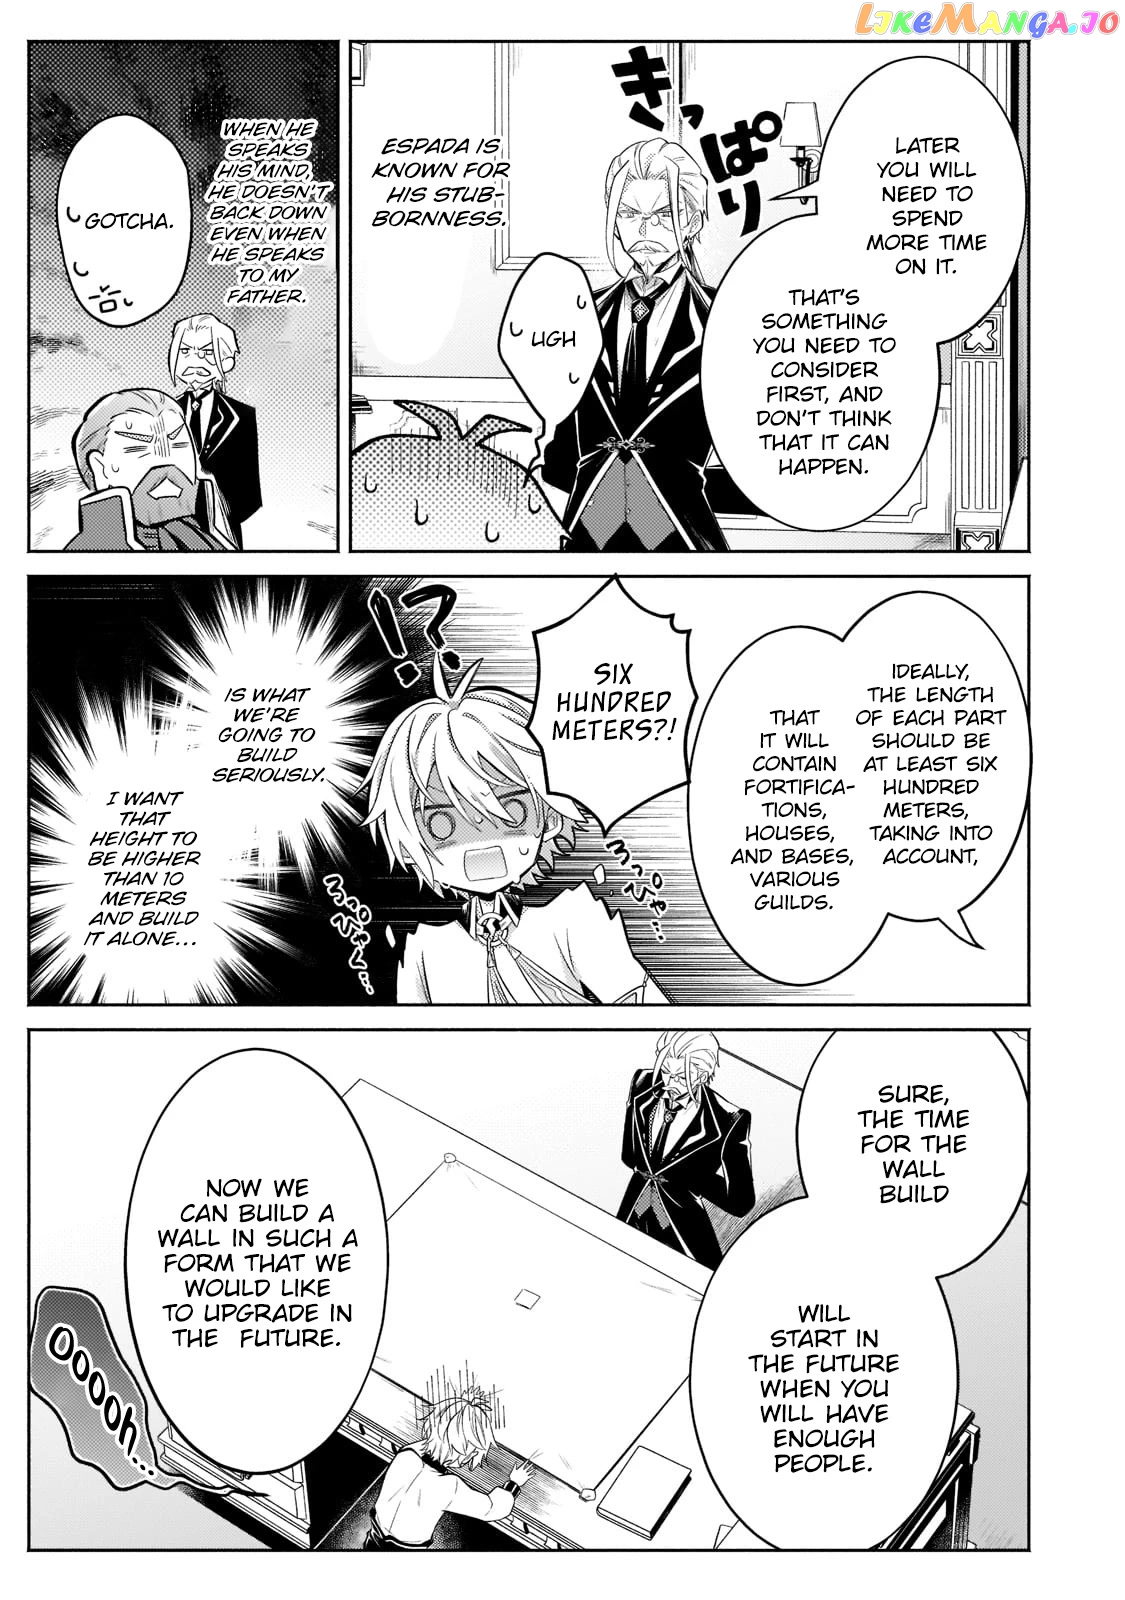 Fun Territory Defense By The Optimistic Lord chapter 15 - page 28